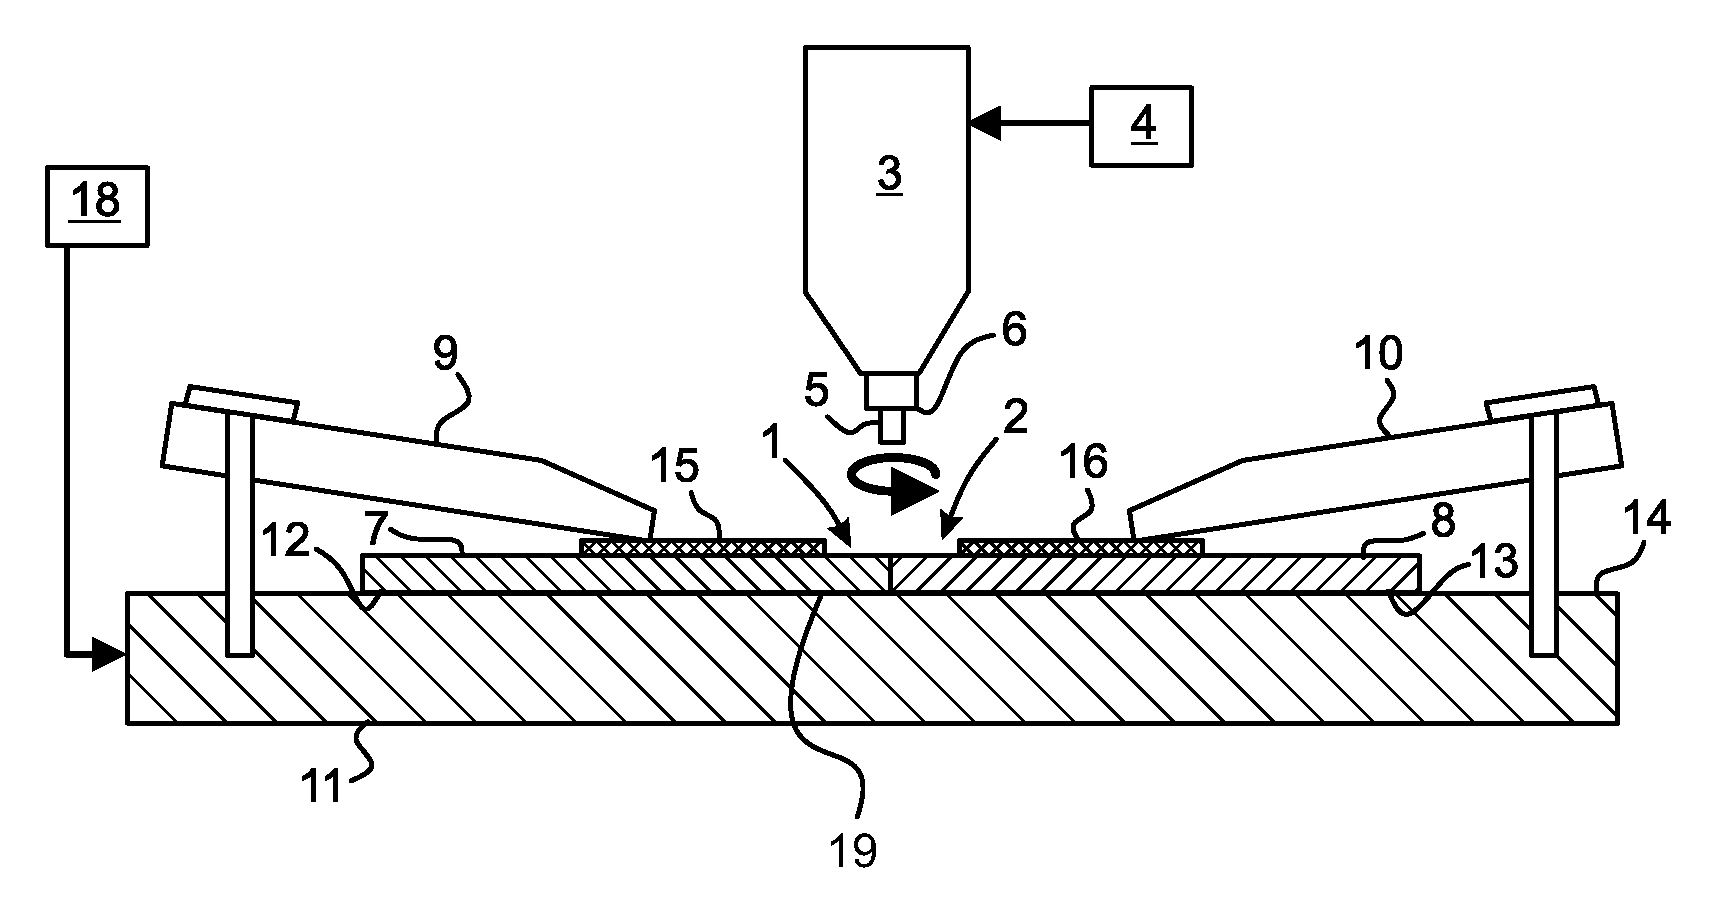 Method of assembling metal parts by friction welding, with the welding temperature being controlled using thermally conductive elements